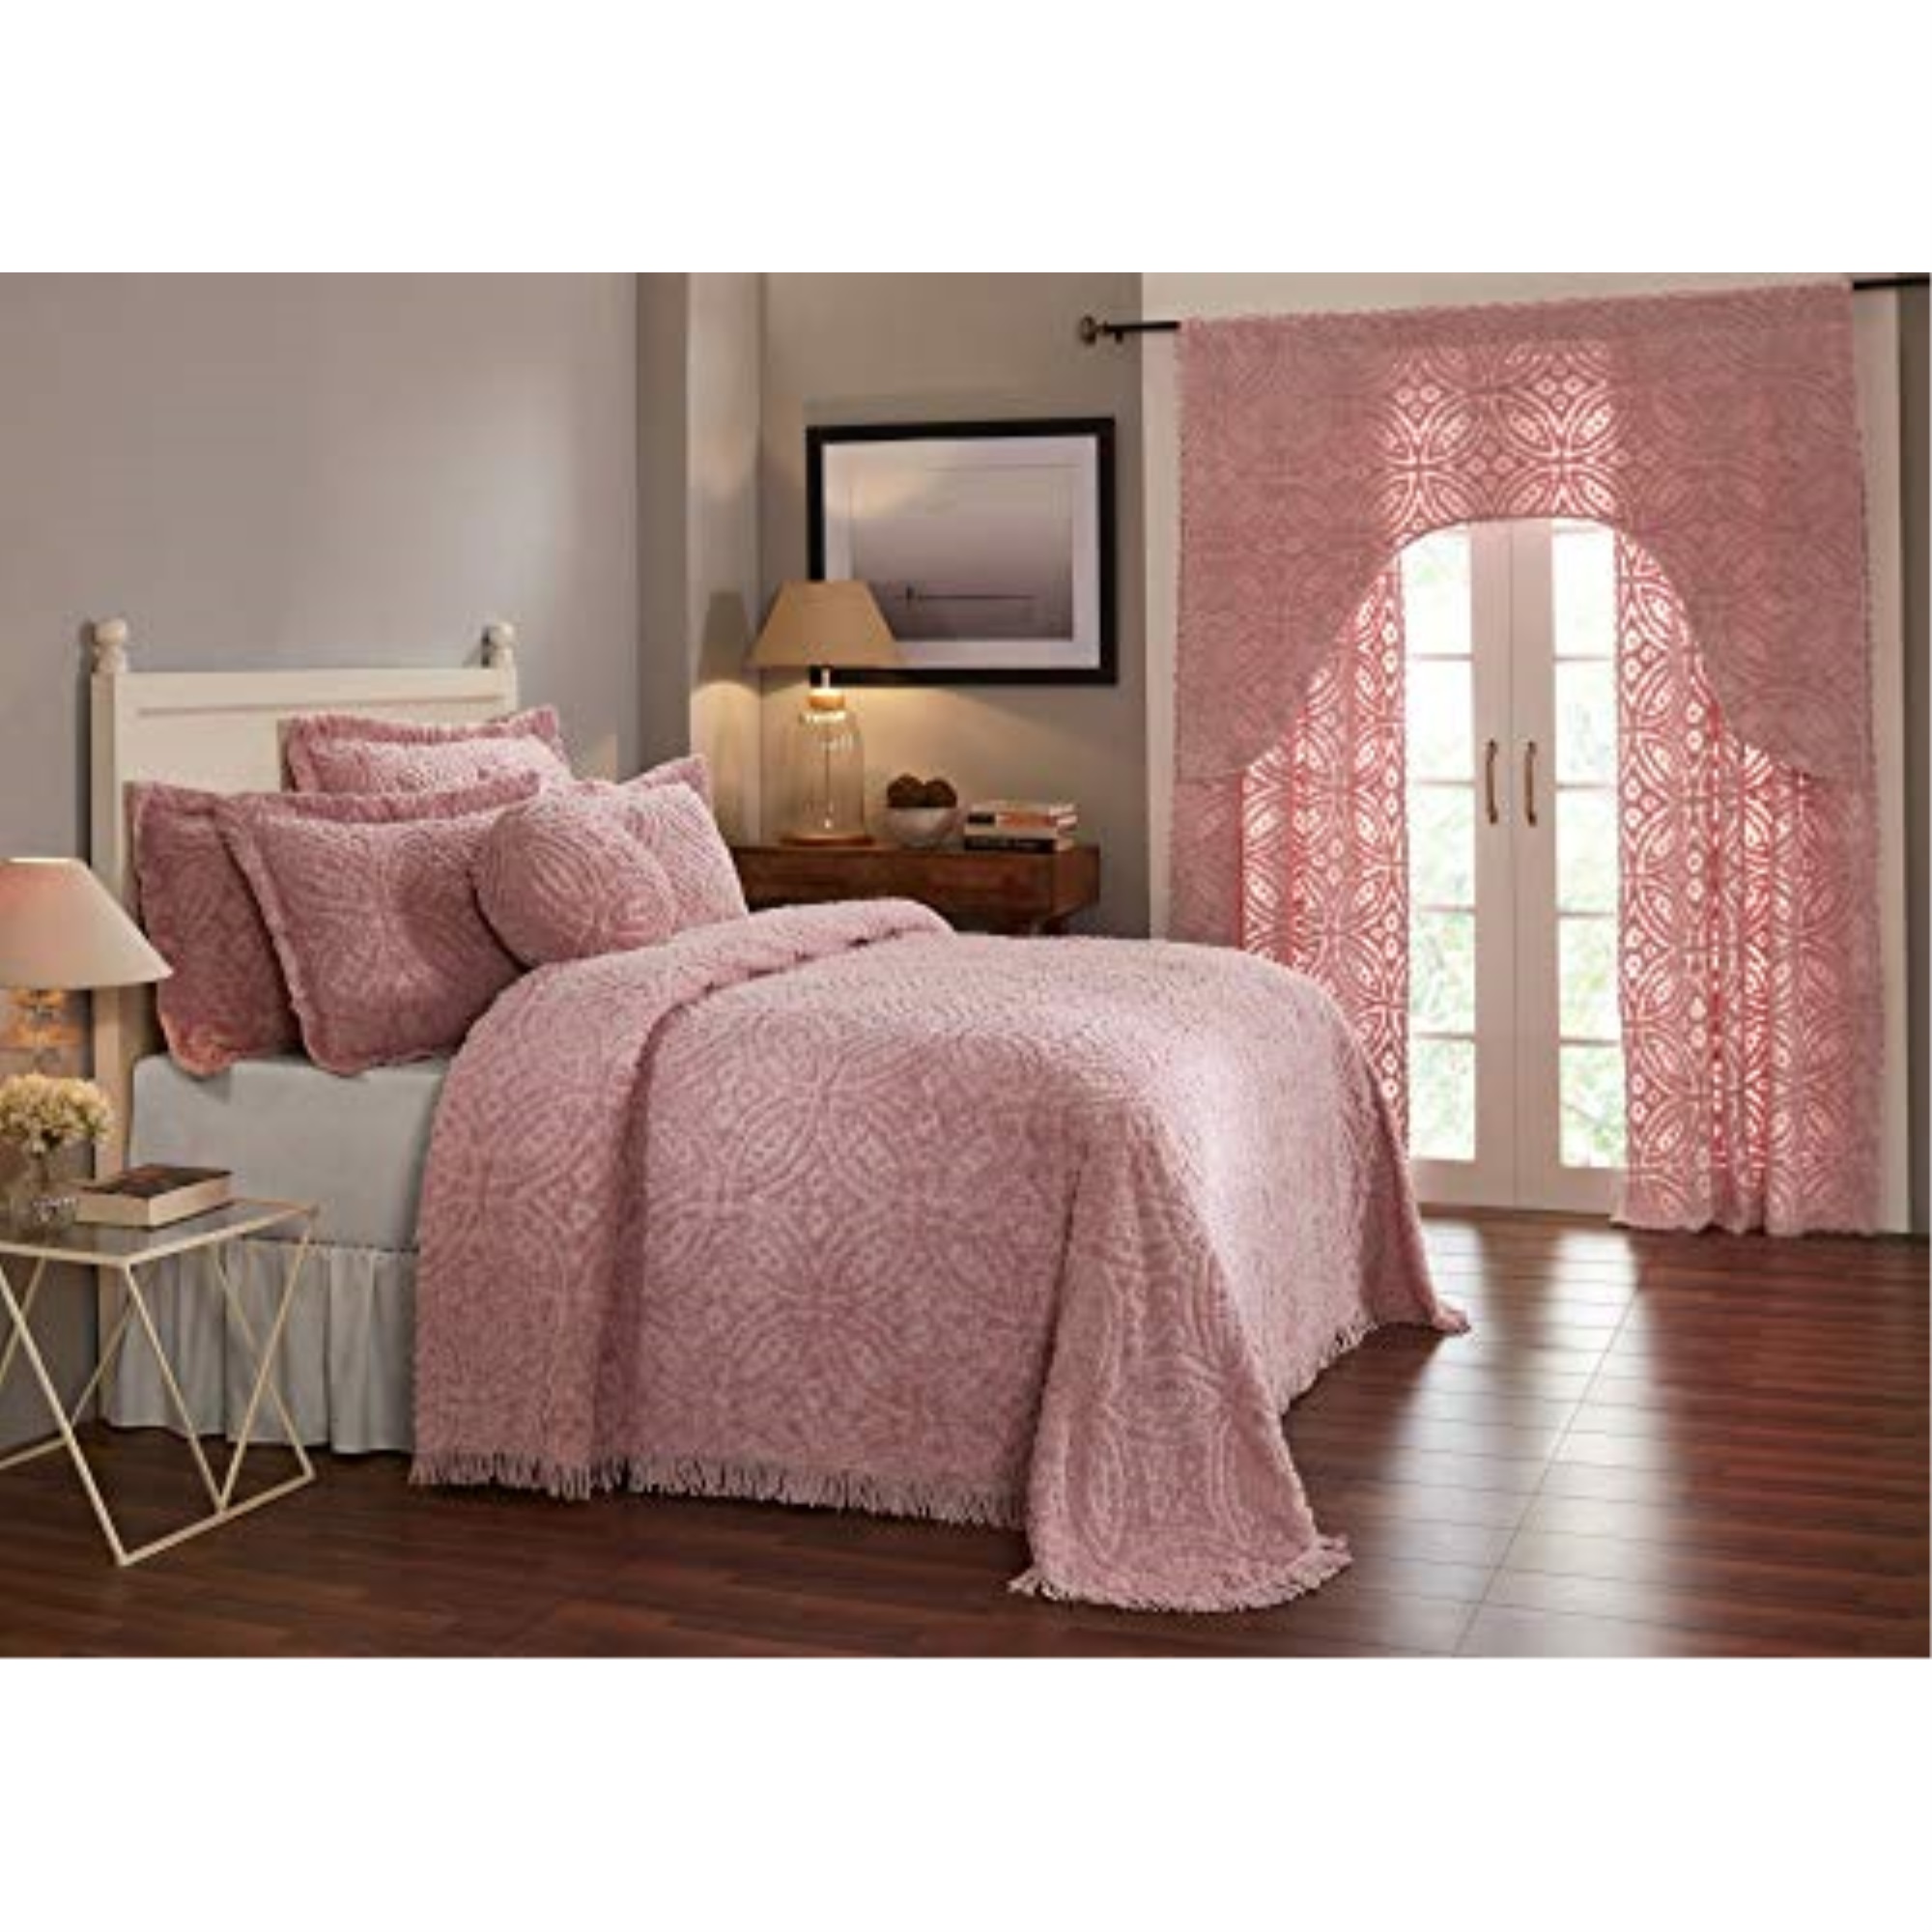 Better Trends Wedding Ring Collection Twin Bedspread in Pink